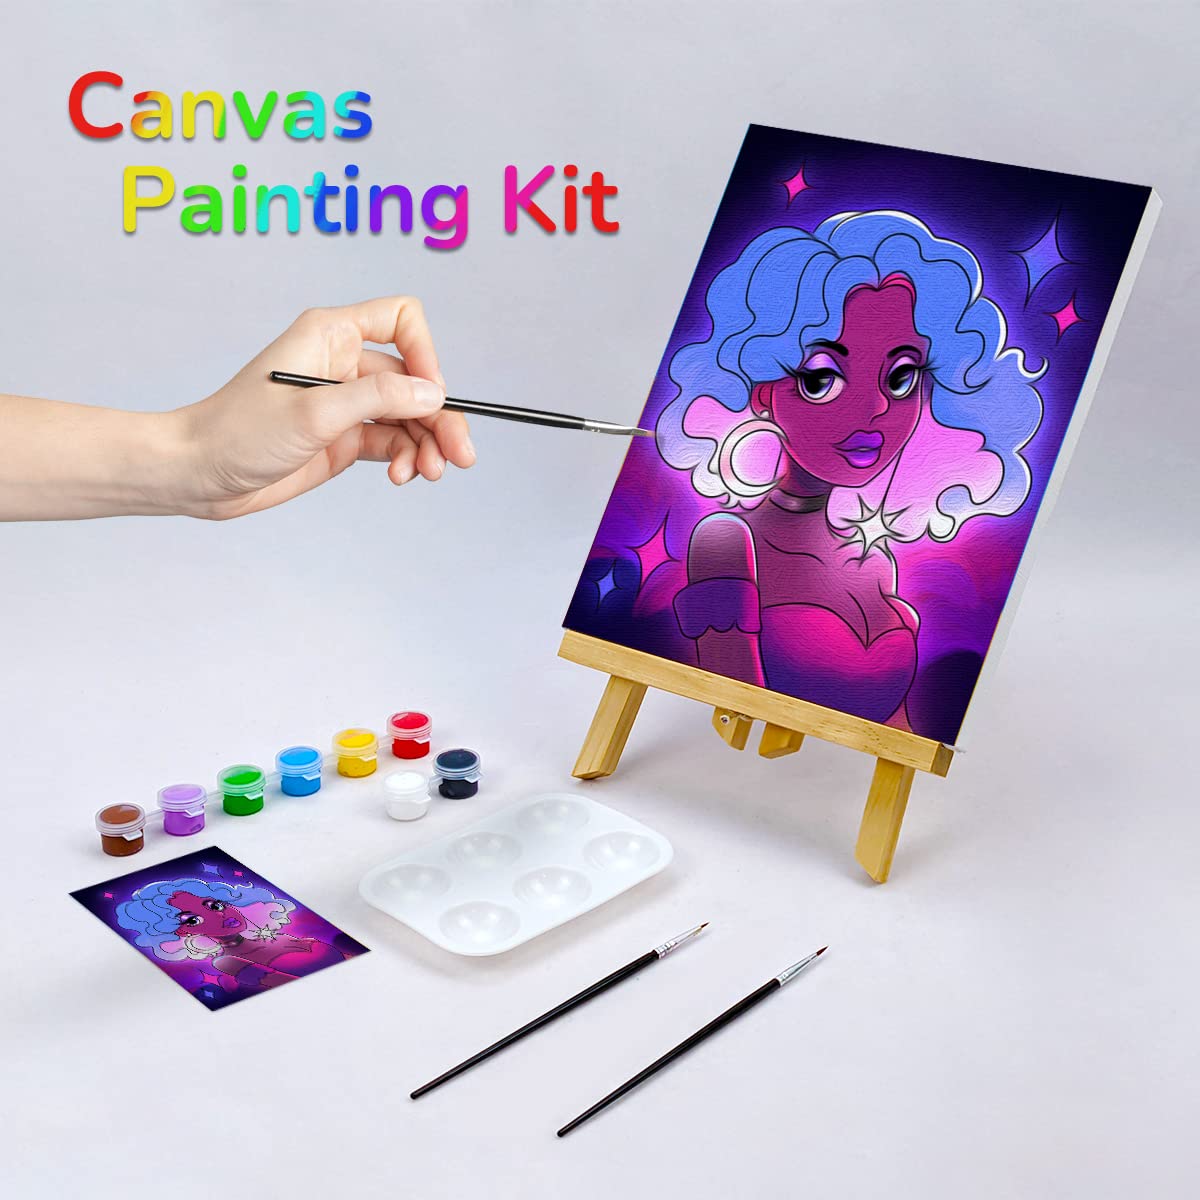  VOCHIC Canvas Painting Kit Pre Drawn Canvas for Painting for Adults  Painting Party Kits Paint and Sip Party Supplies 8x10 Canvas to Paint 8  Acrylic Colors,3 Brush,1 Pallet Girl Paint Art